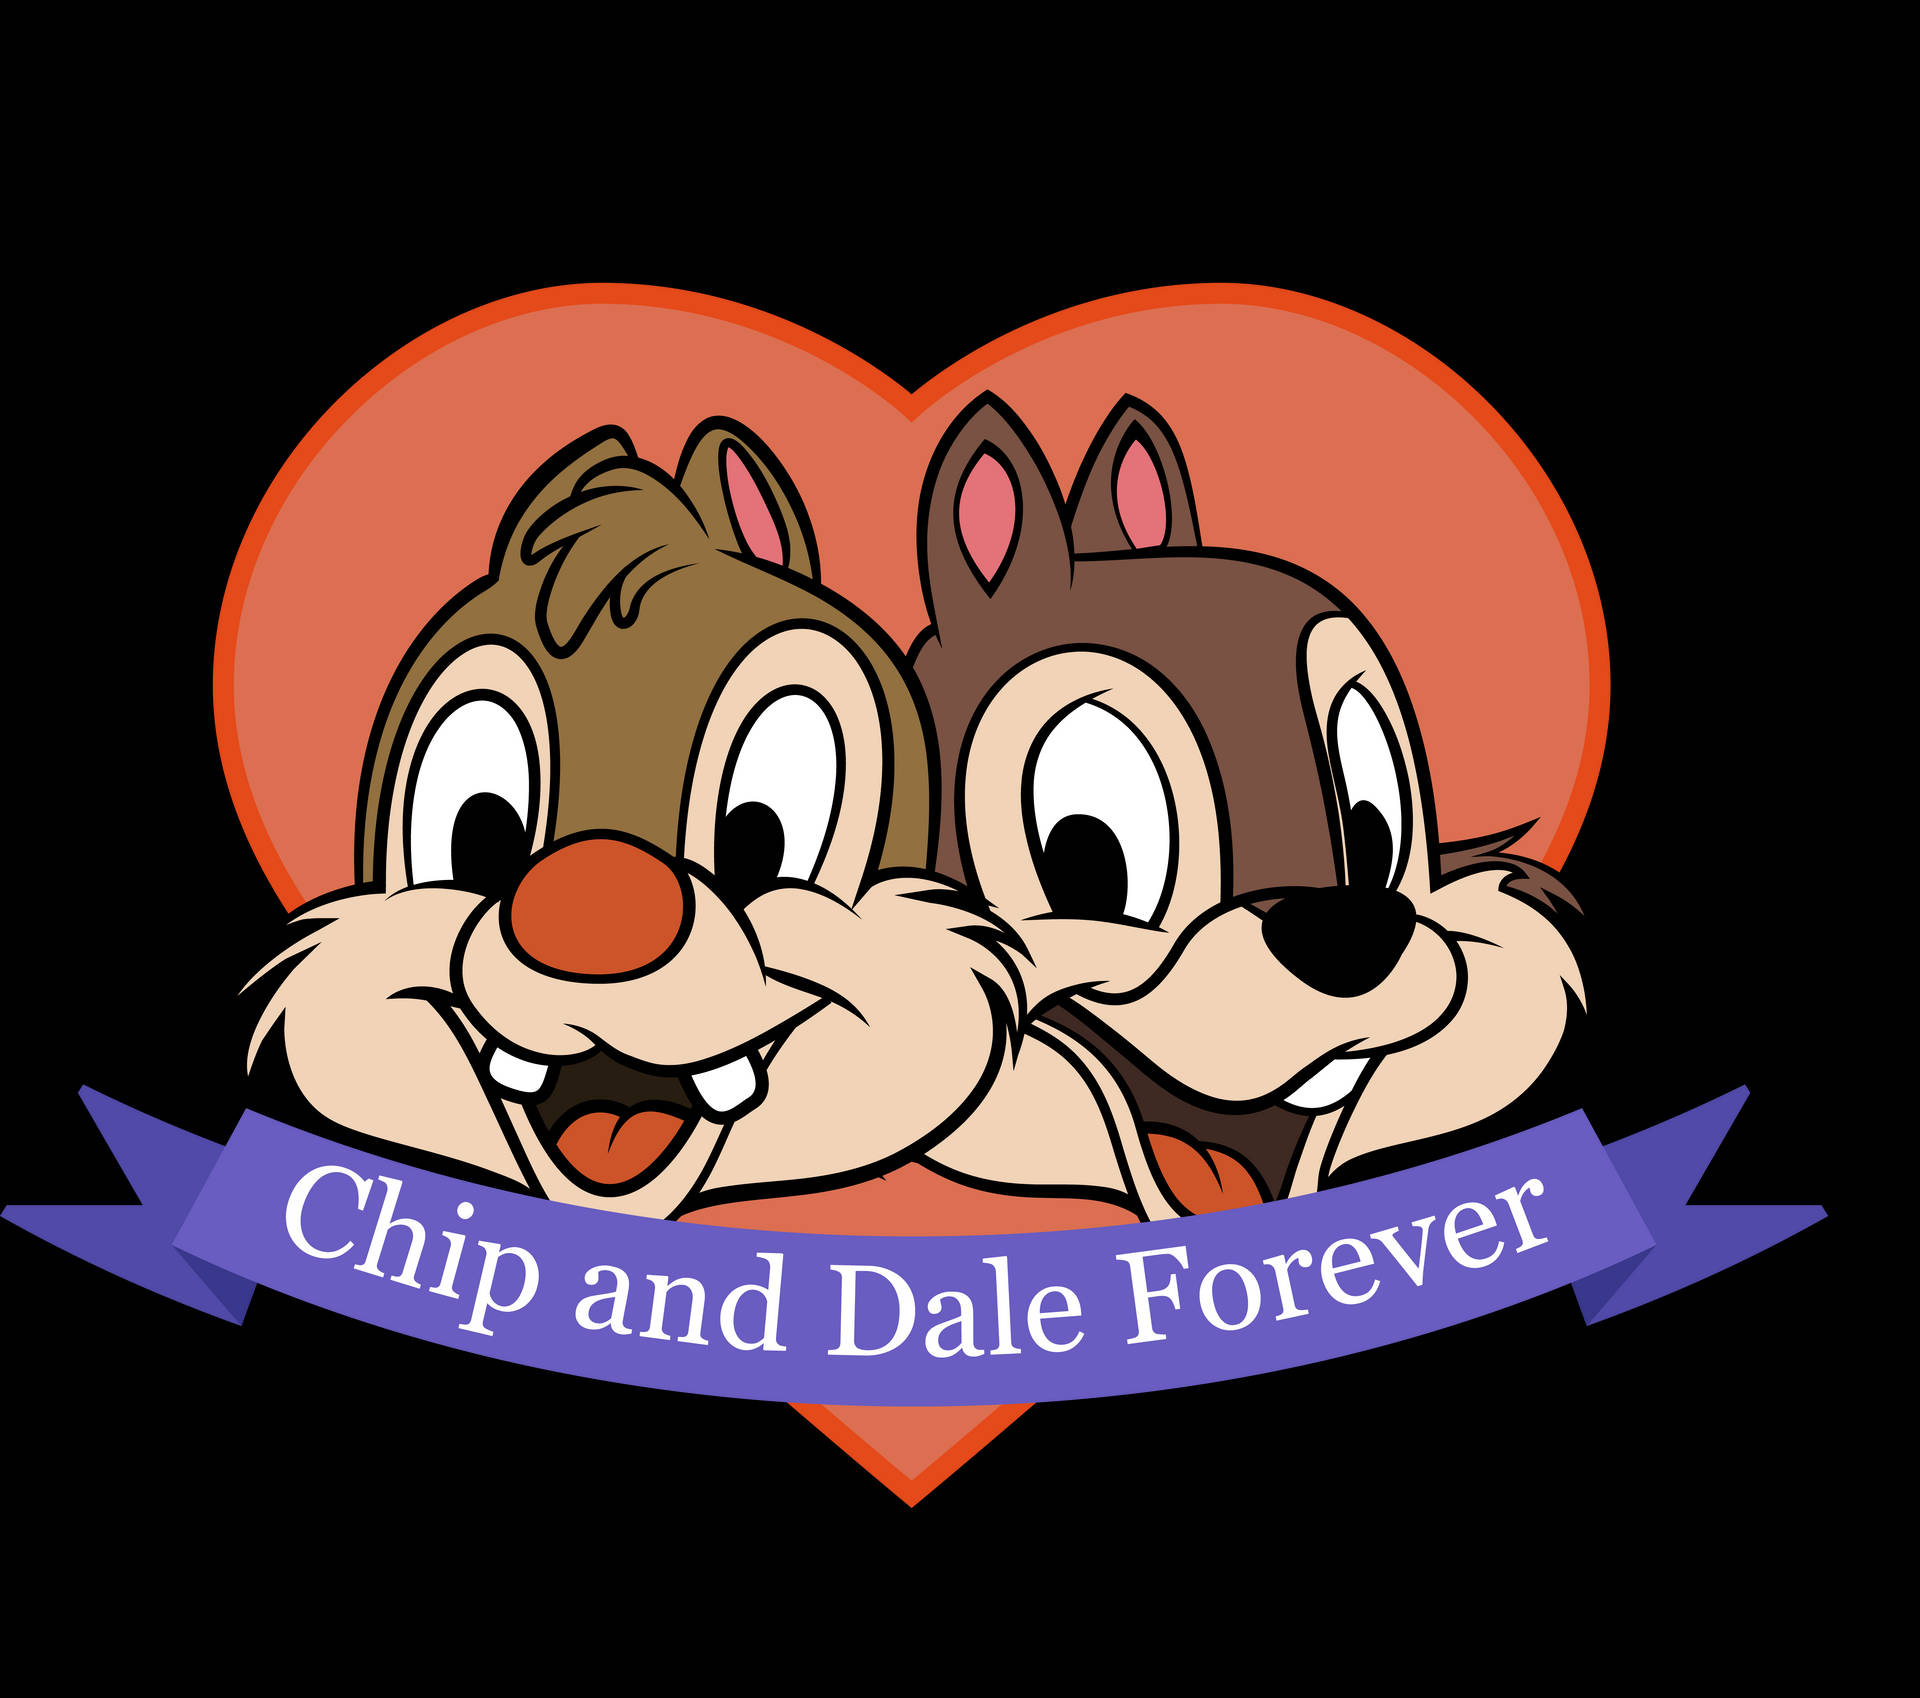 Chip N Dale On White Backdrop Background